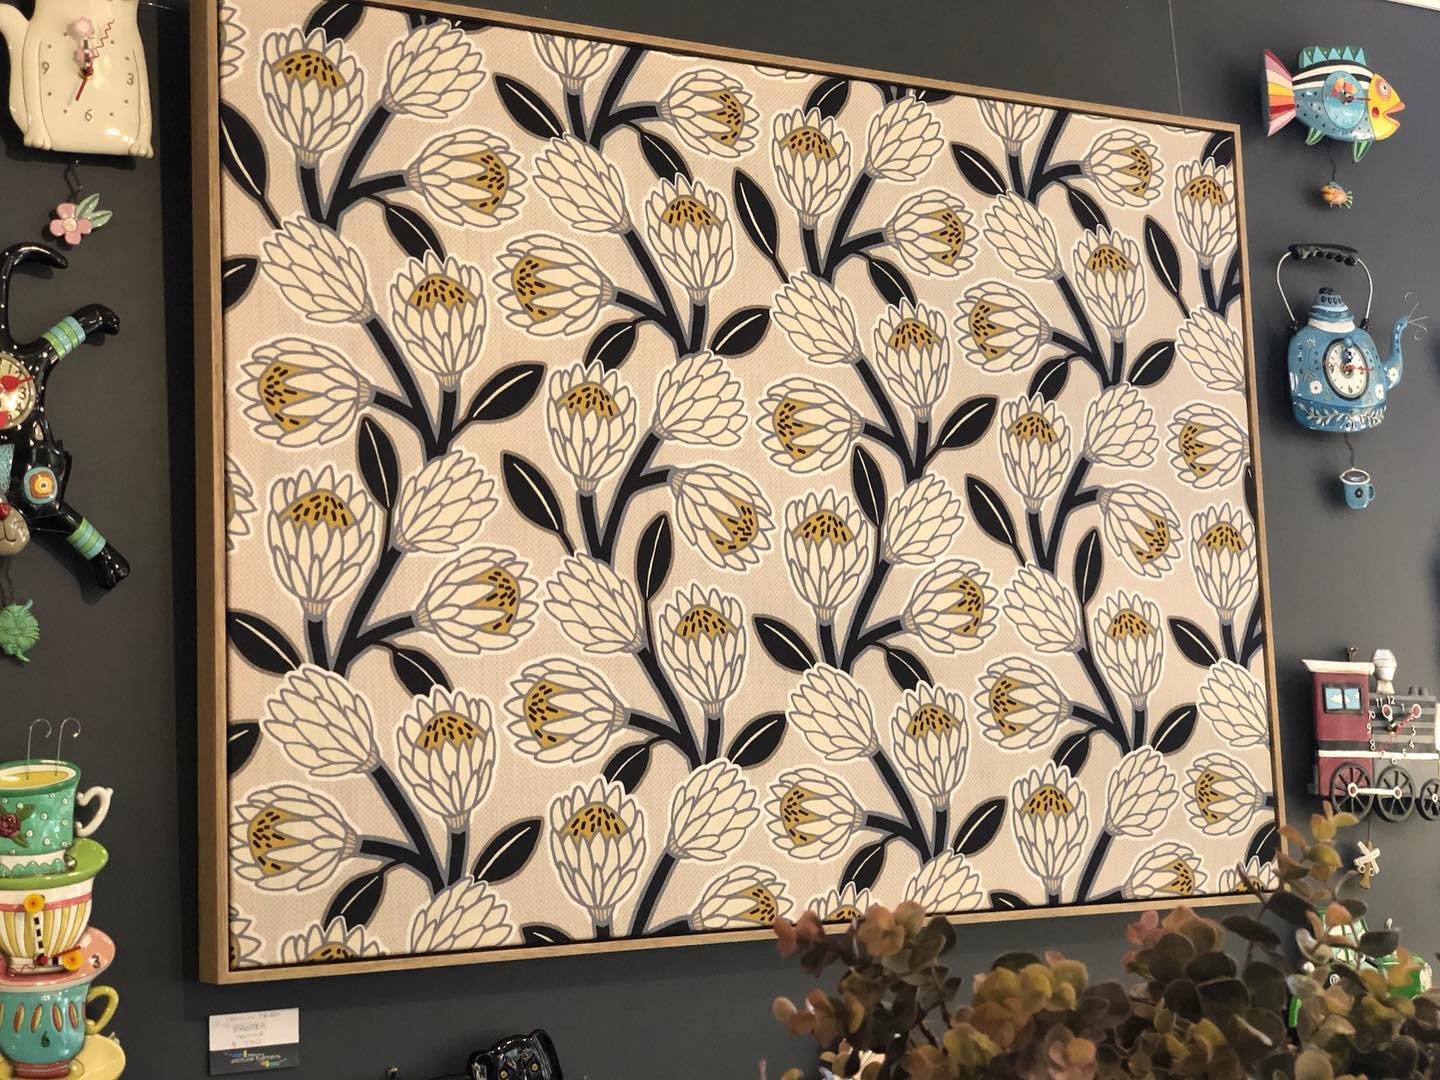 Inspired by Africa and designed in South Africa, this fabric was destined to be artwork. Now framed, this artwork is ready to find it&rsquo;s new home. 

#alburypictureframers #alburywodonga #alburyframing